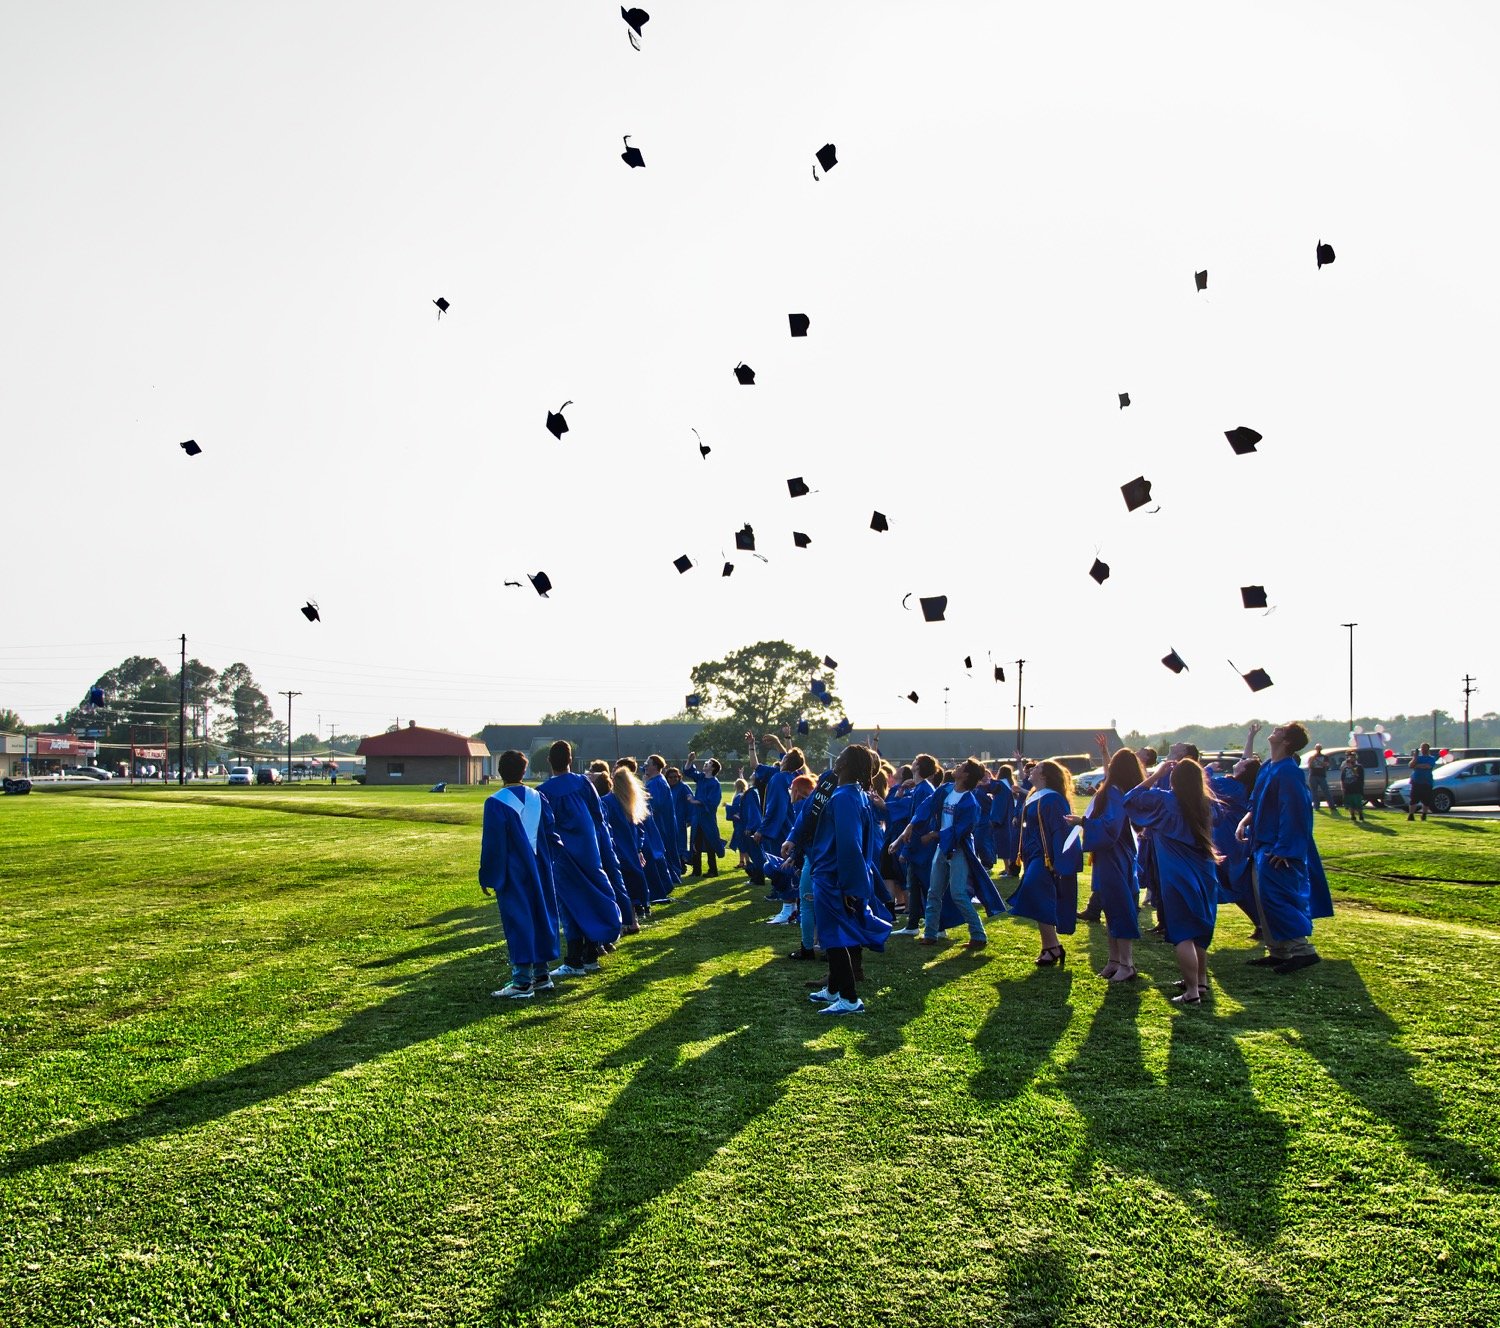 Though much of this May was unlike others, some traditions – like the annual tossing of caps by graduates – remained.